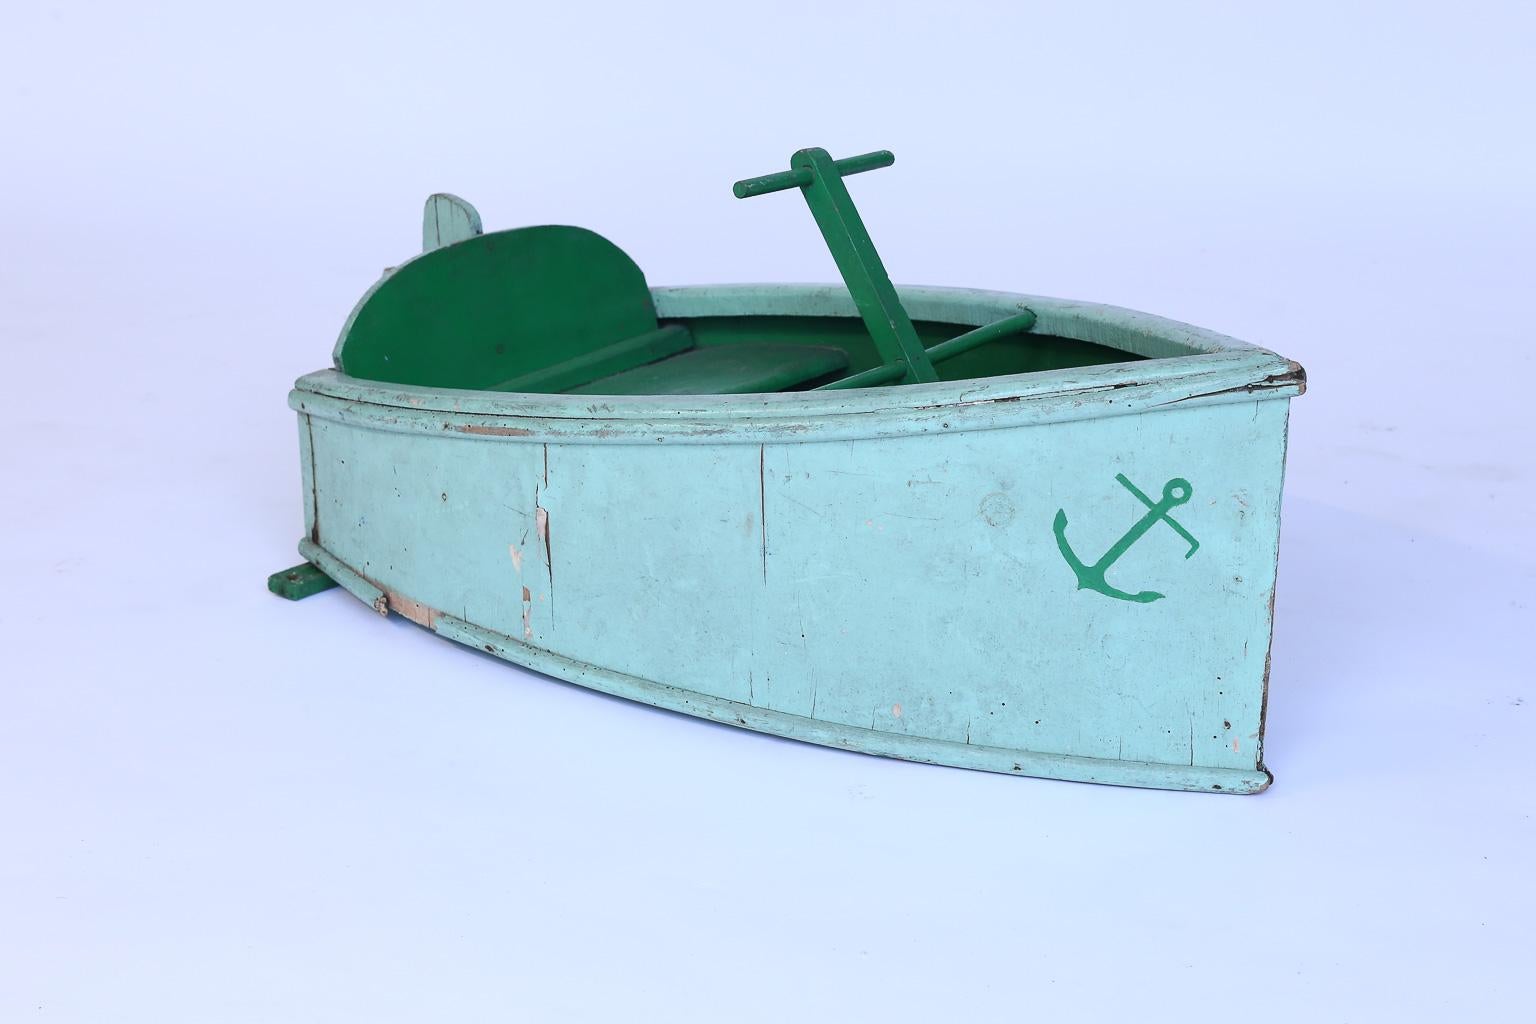 Found in the South of France this painted boat from a children's carousel ride is absolutely adorable. The piece has its original green paint and would be lovely in a beach, lake or nursery setting.